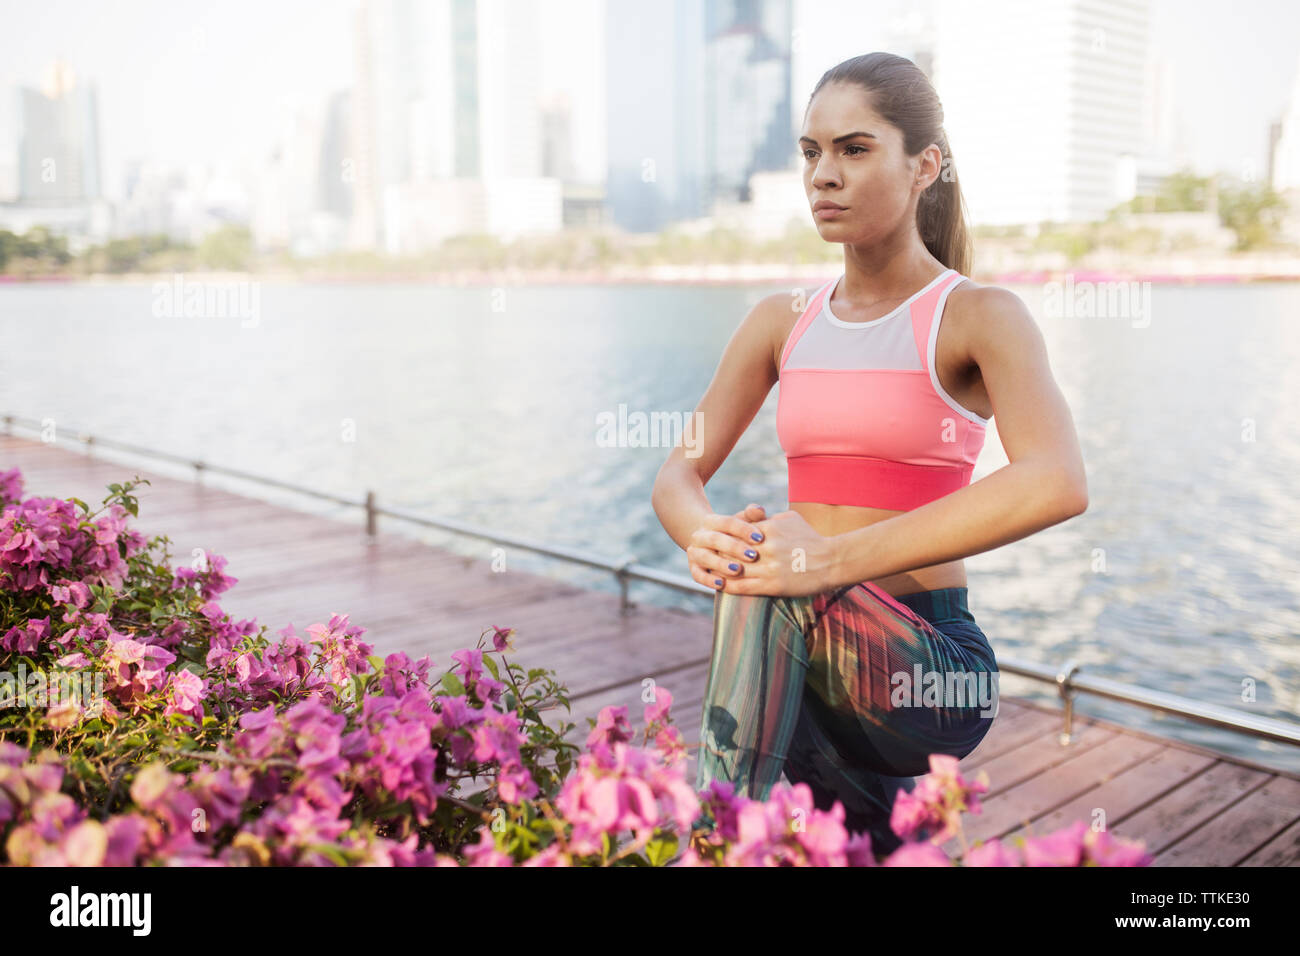 Woman exercising and stretching by plants at park Stock Photo